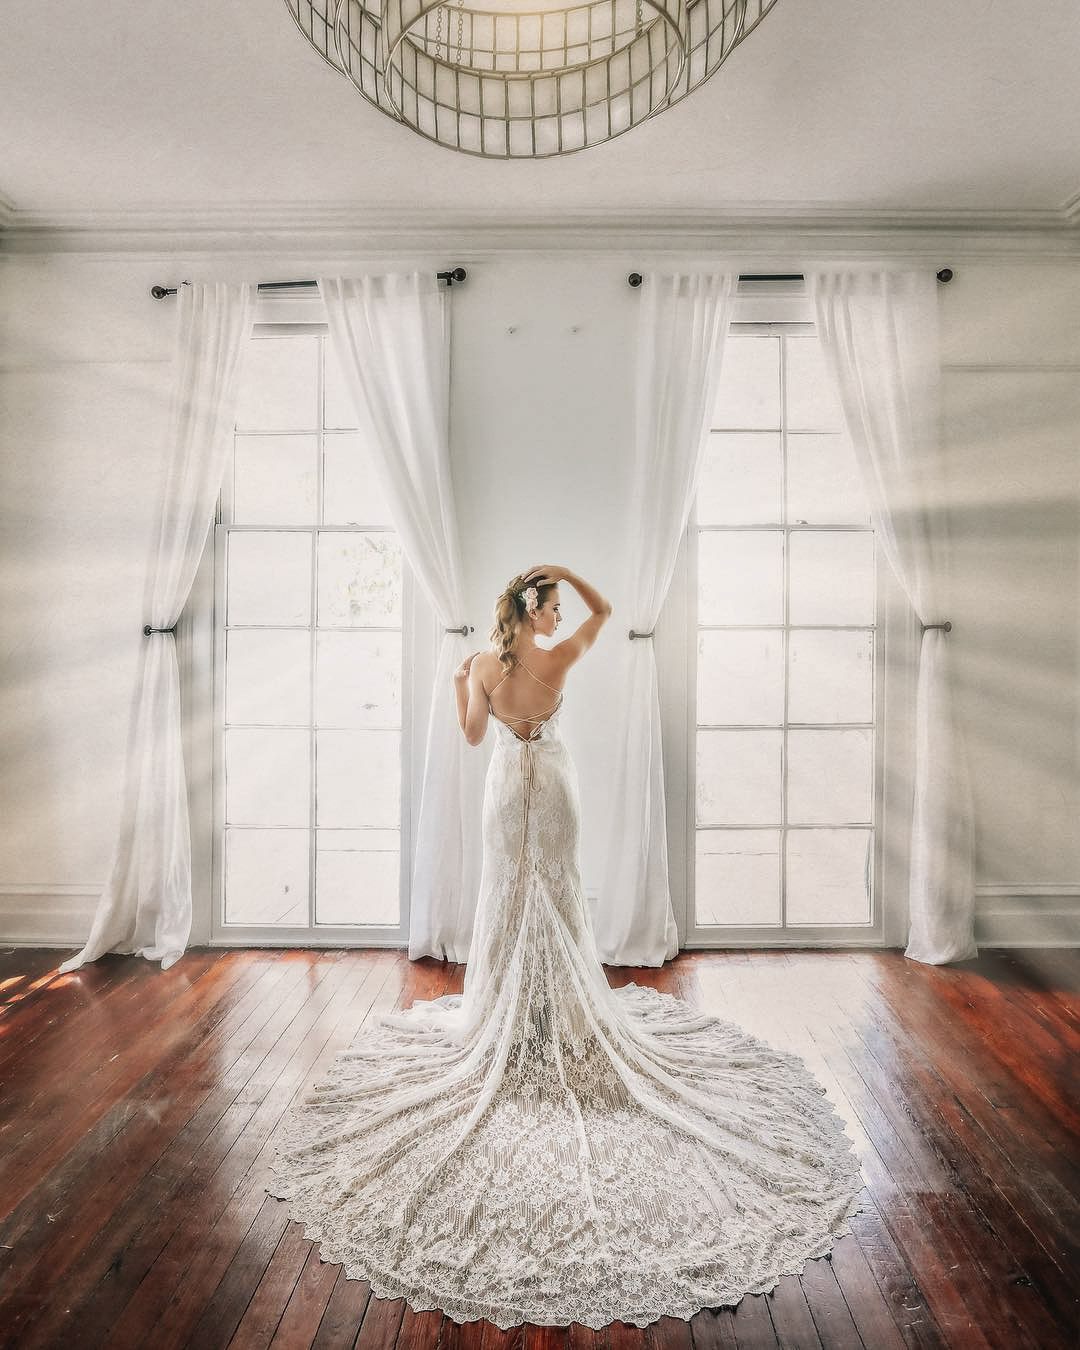 a bride posing with the train of her wedding dress spread out while light shines from two windows behind her